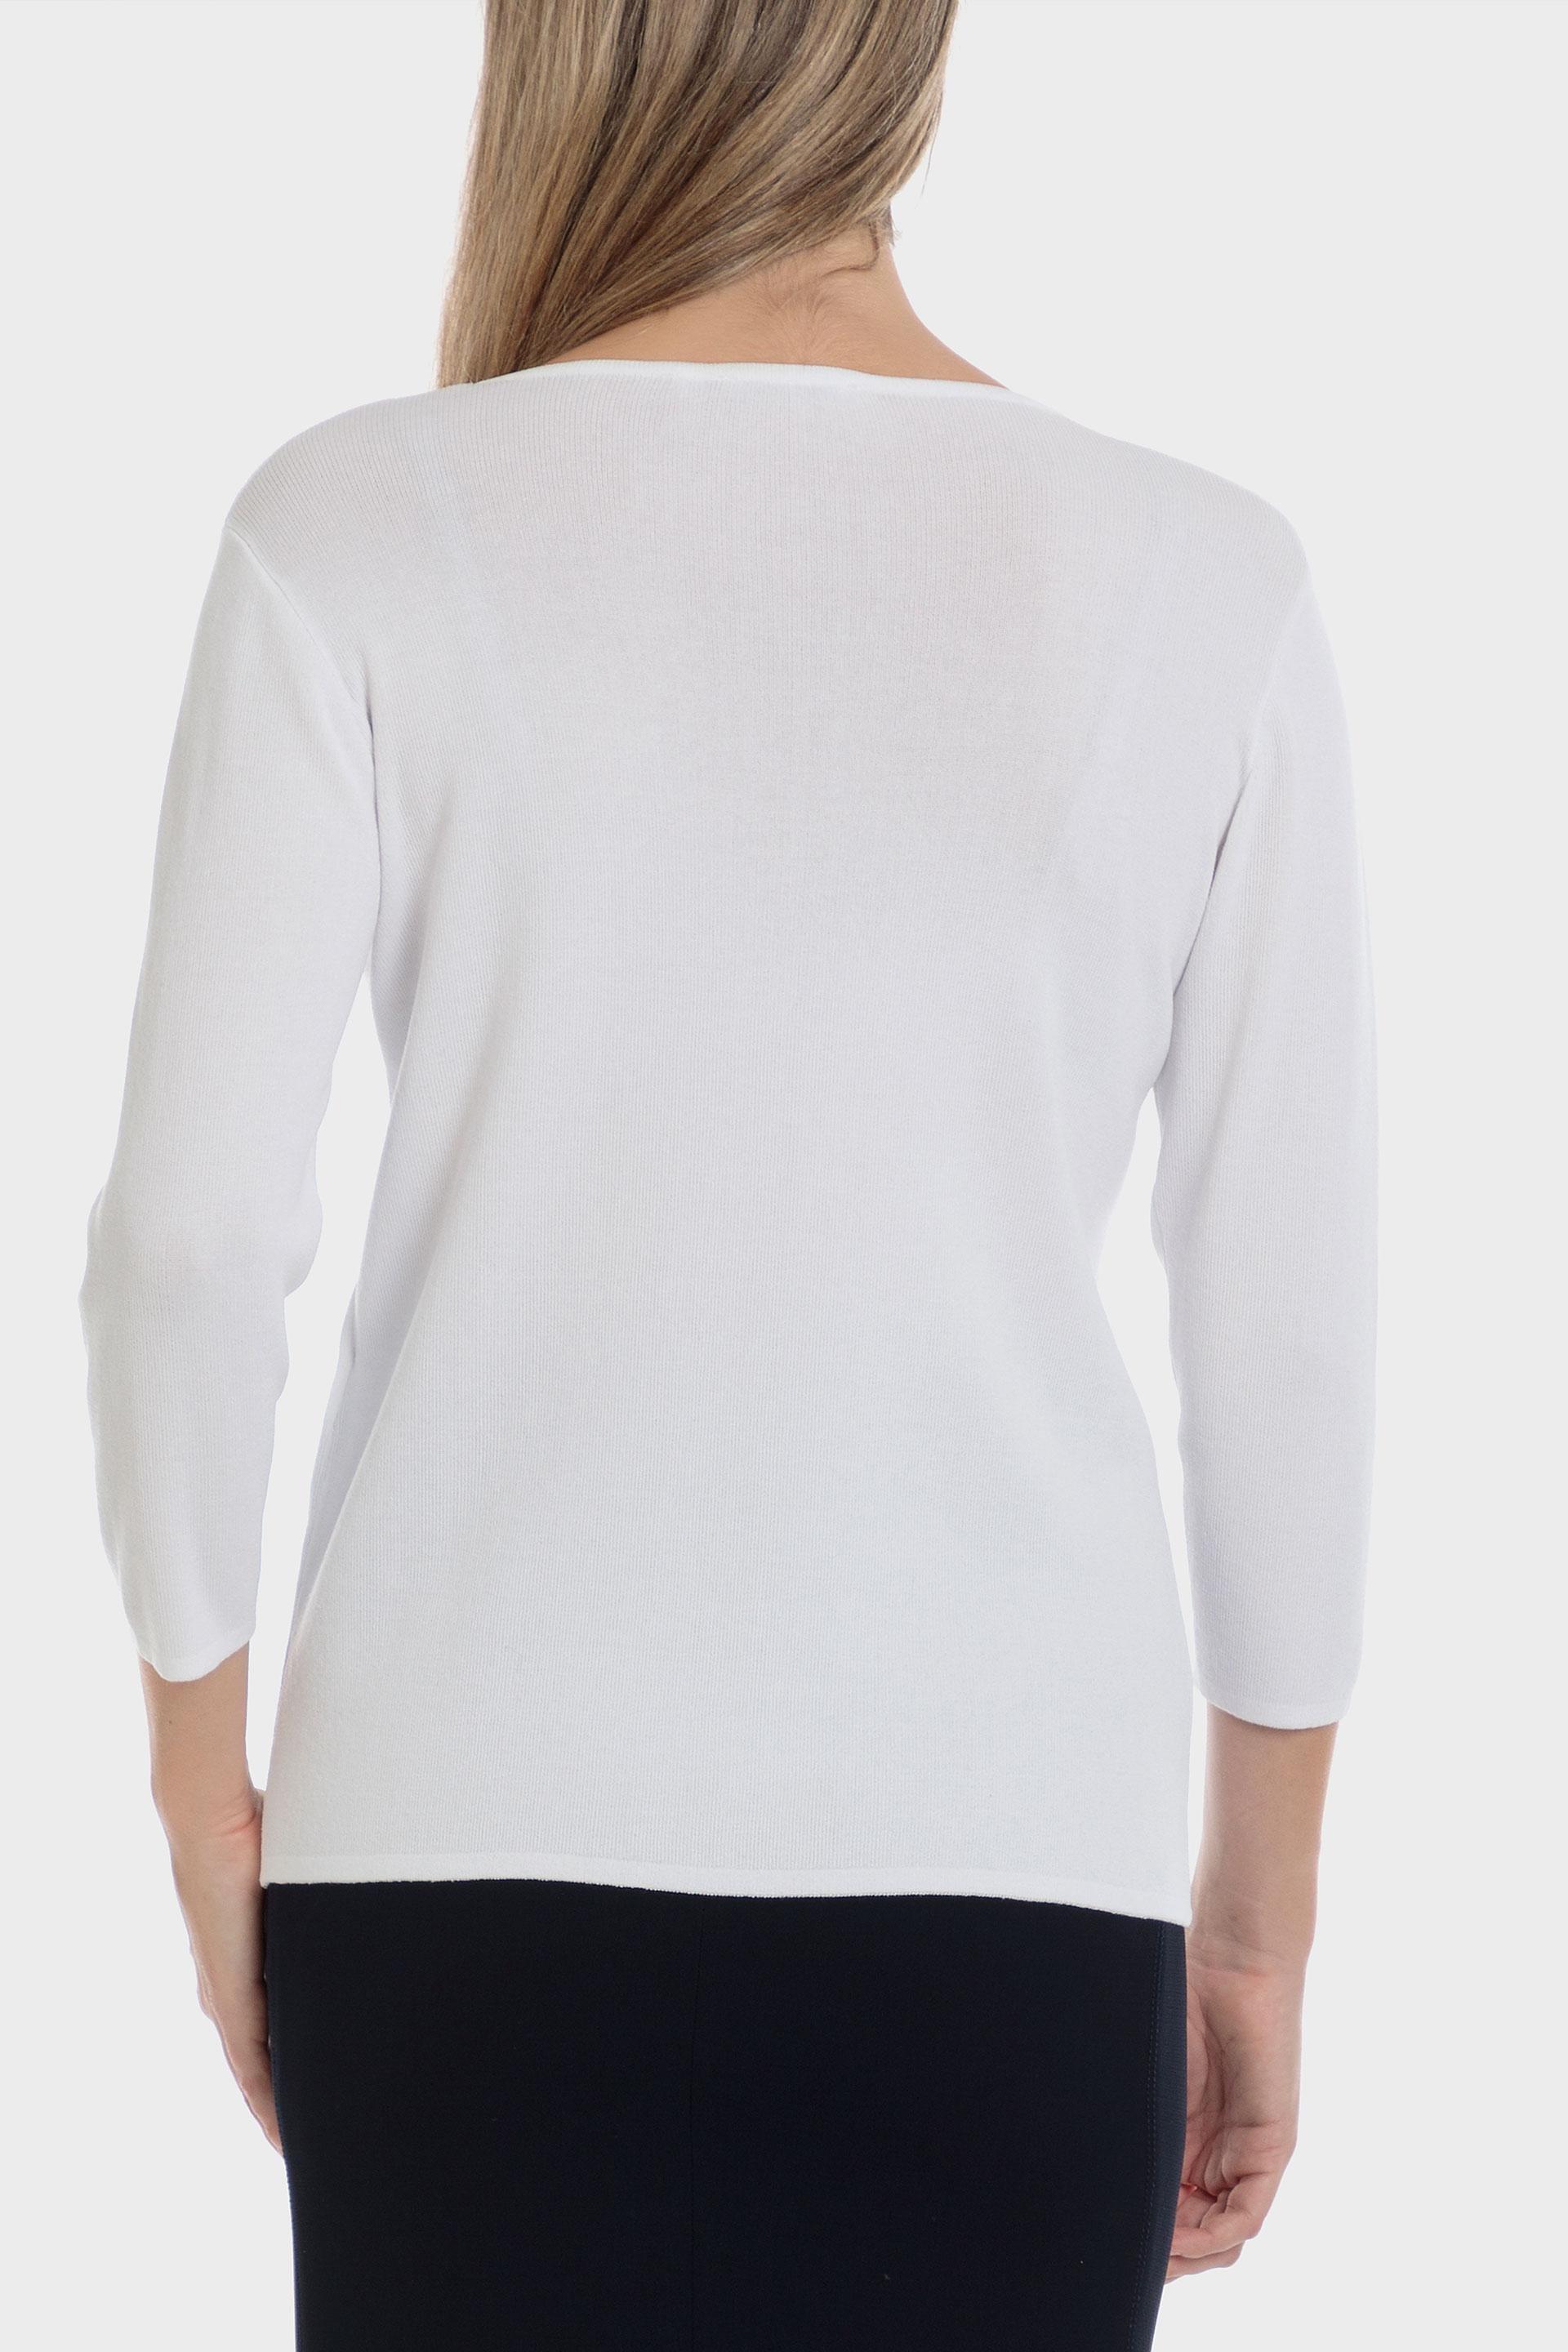 Punt Roma - White Studded Sweater